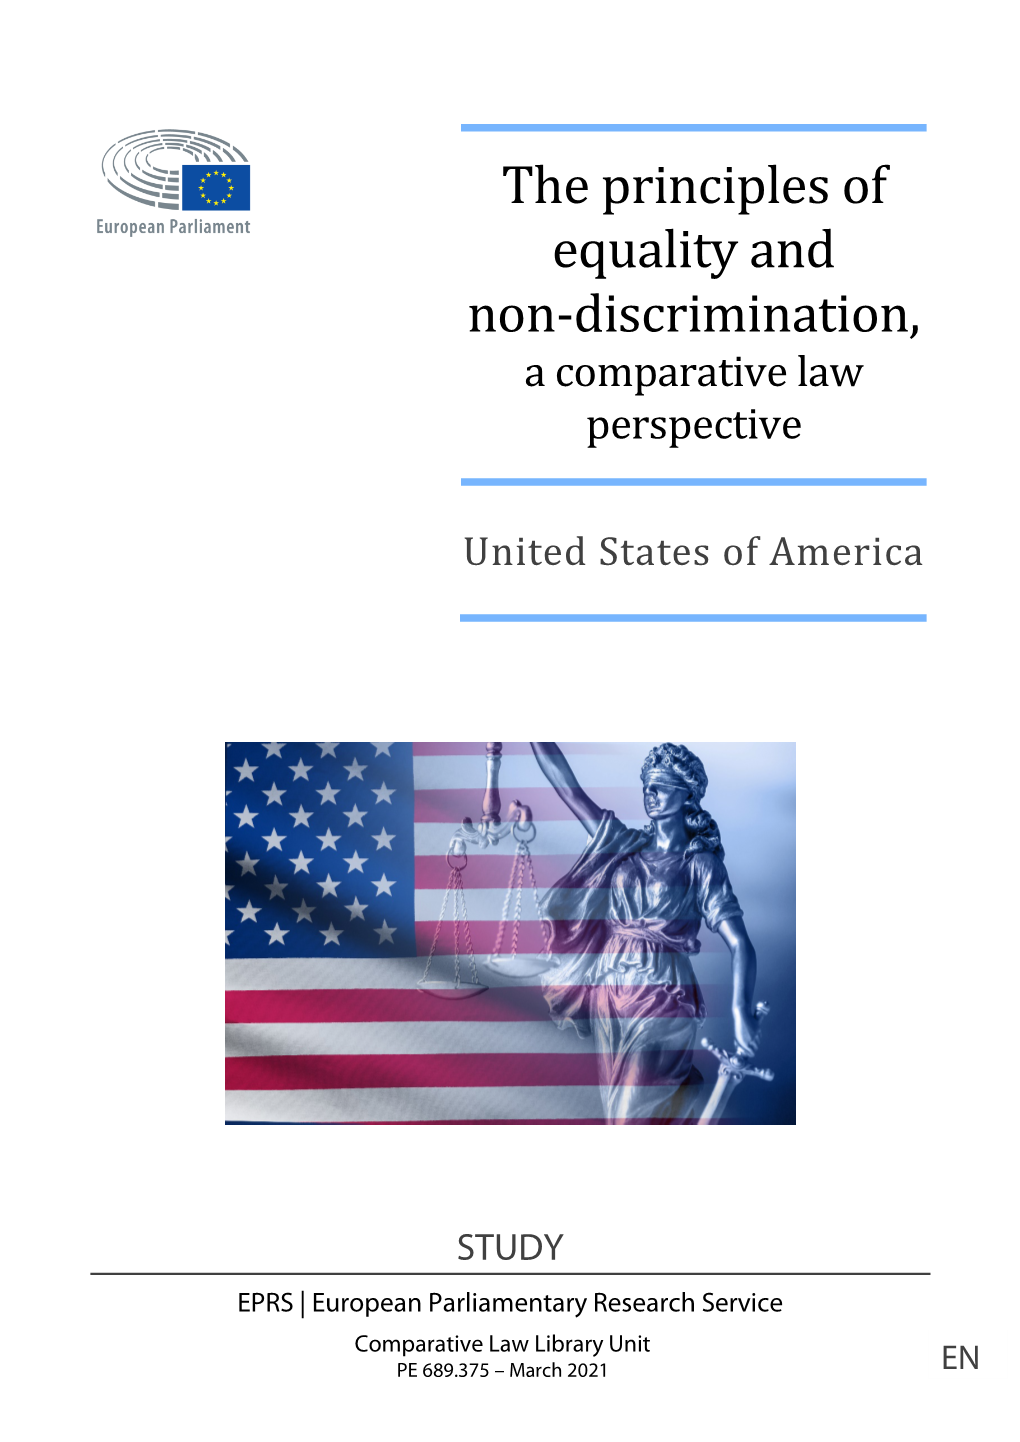 The Principles of Equality and Non-Discrimination, a Comparative-Law Perspective